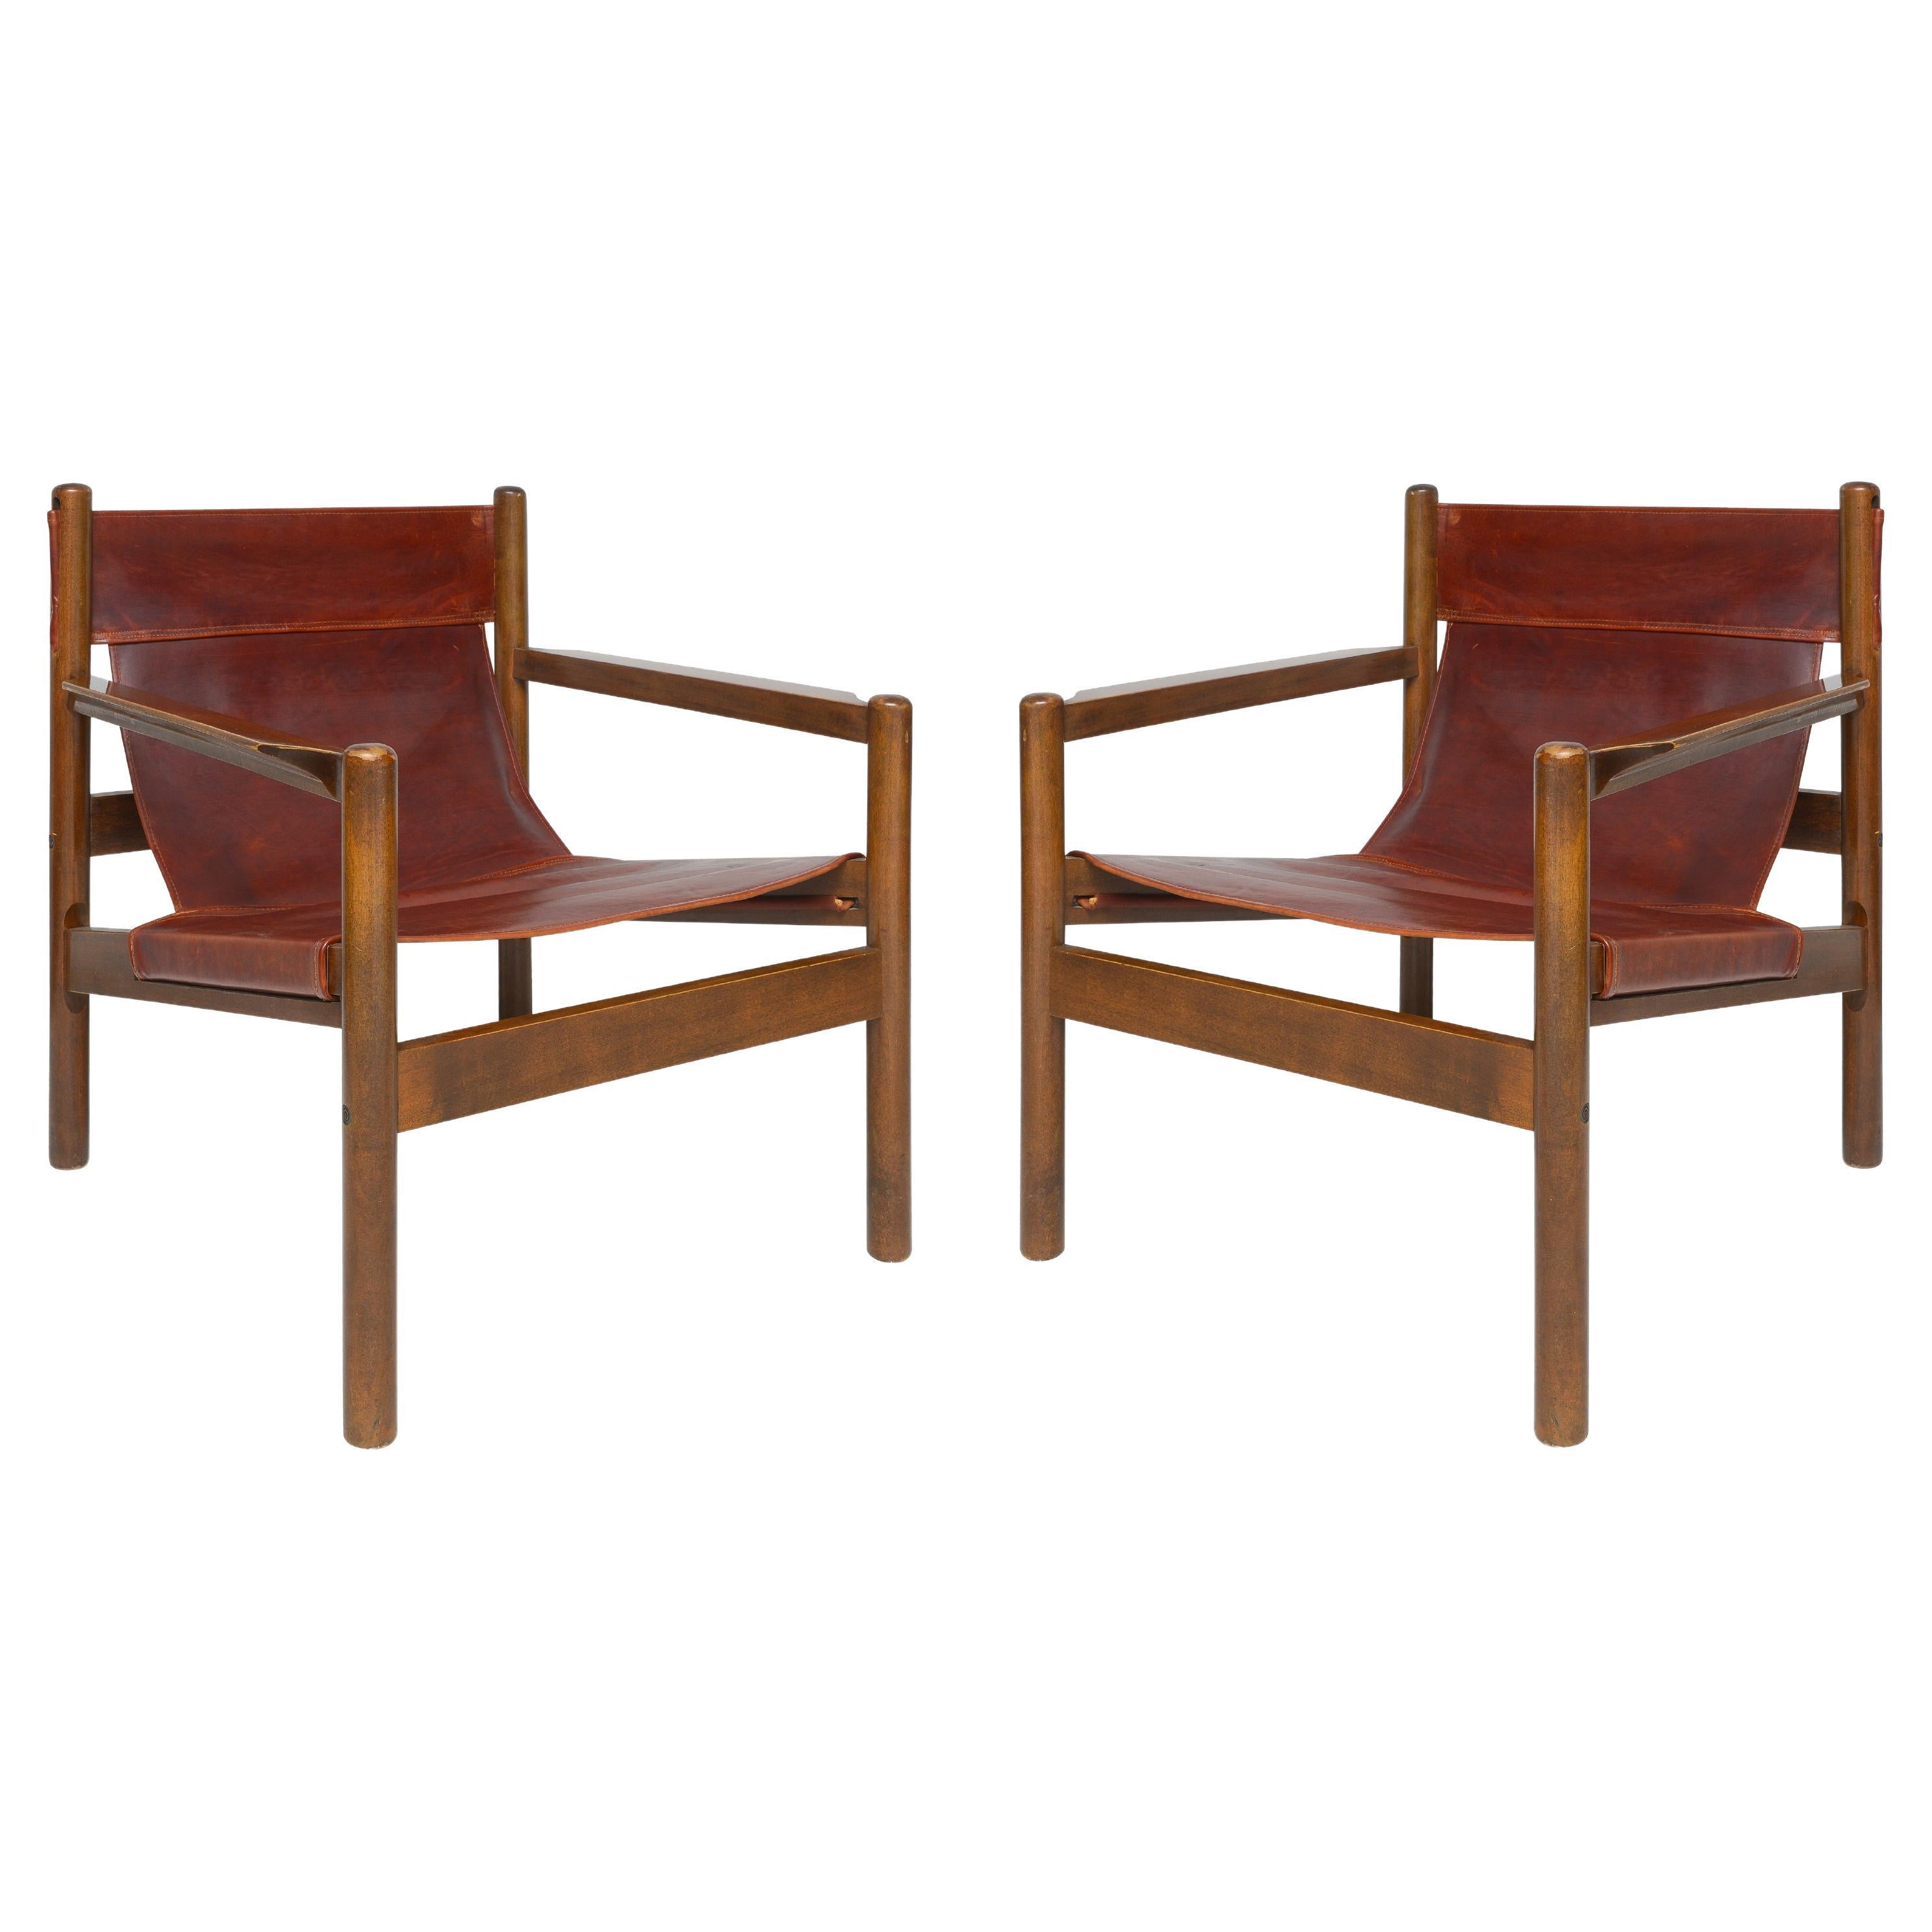  Vintage Pair of Safari-Style Leather Chairs For Sale